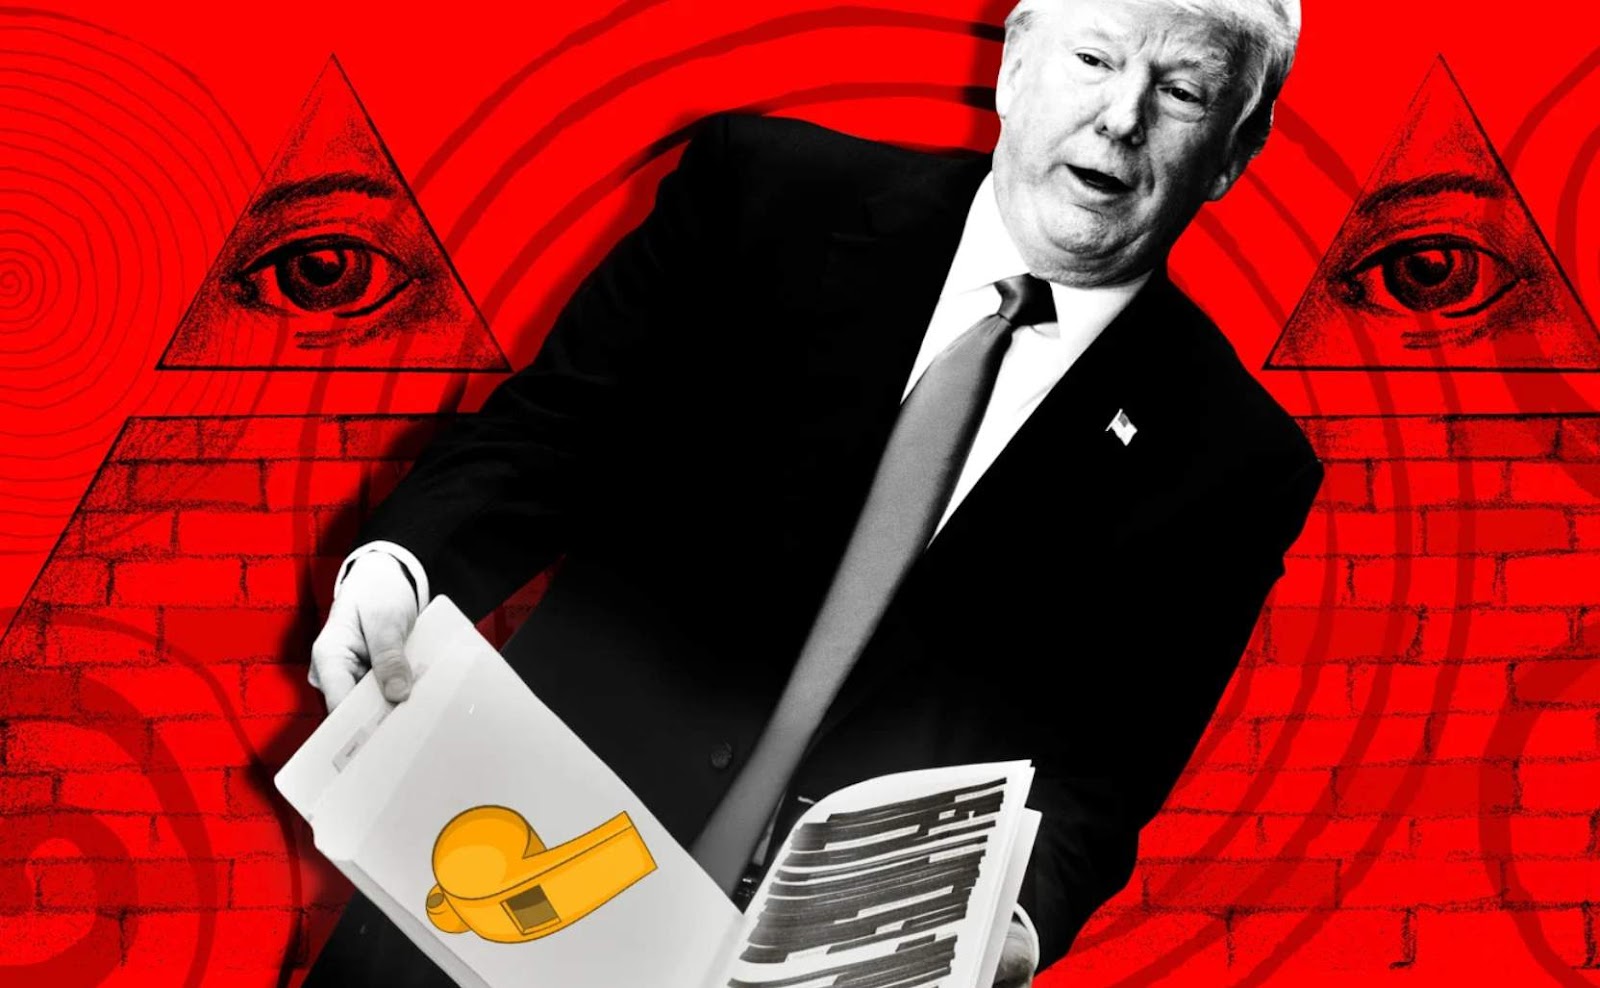 Illustration of Trump, who saw many whistleblowers during his presidency